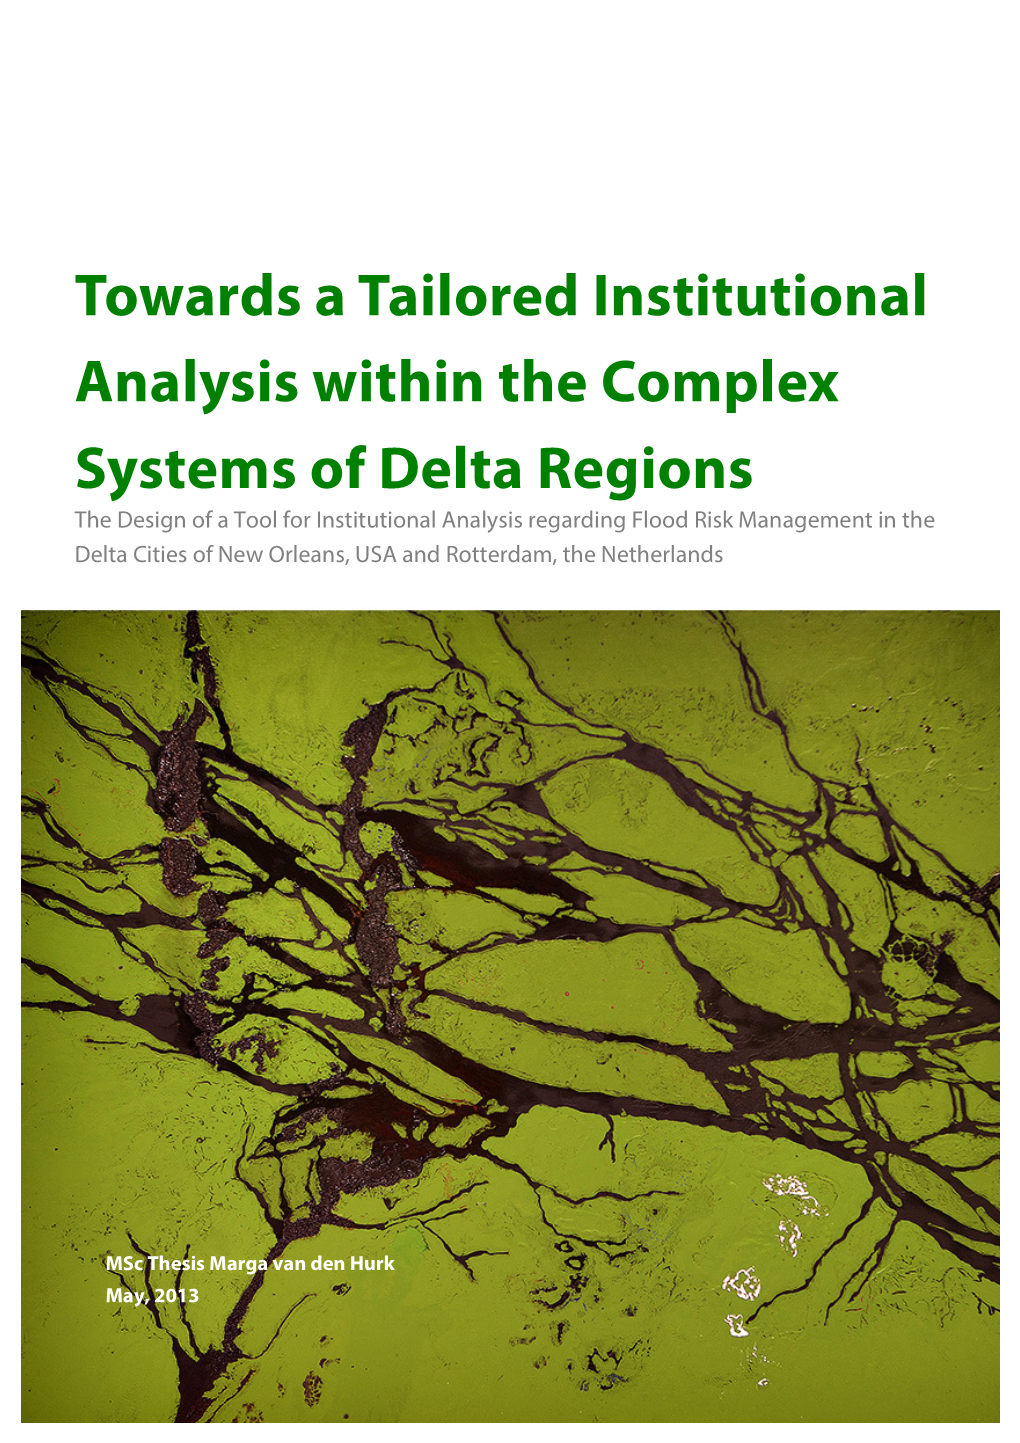 Towards a Tailored Institutional Analysis Within the Complex Systems of Delta Regions